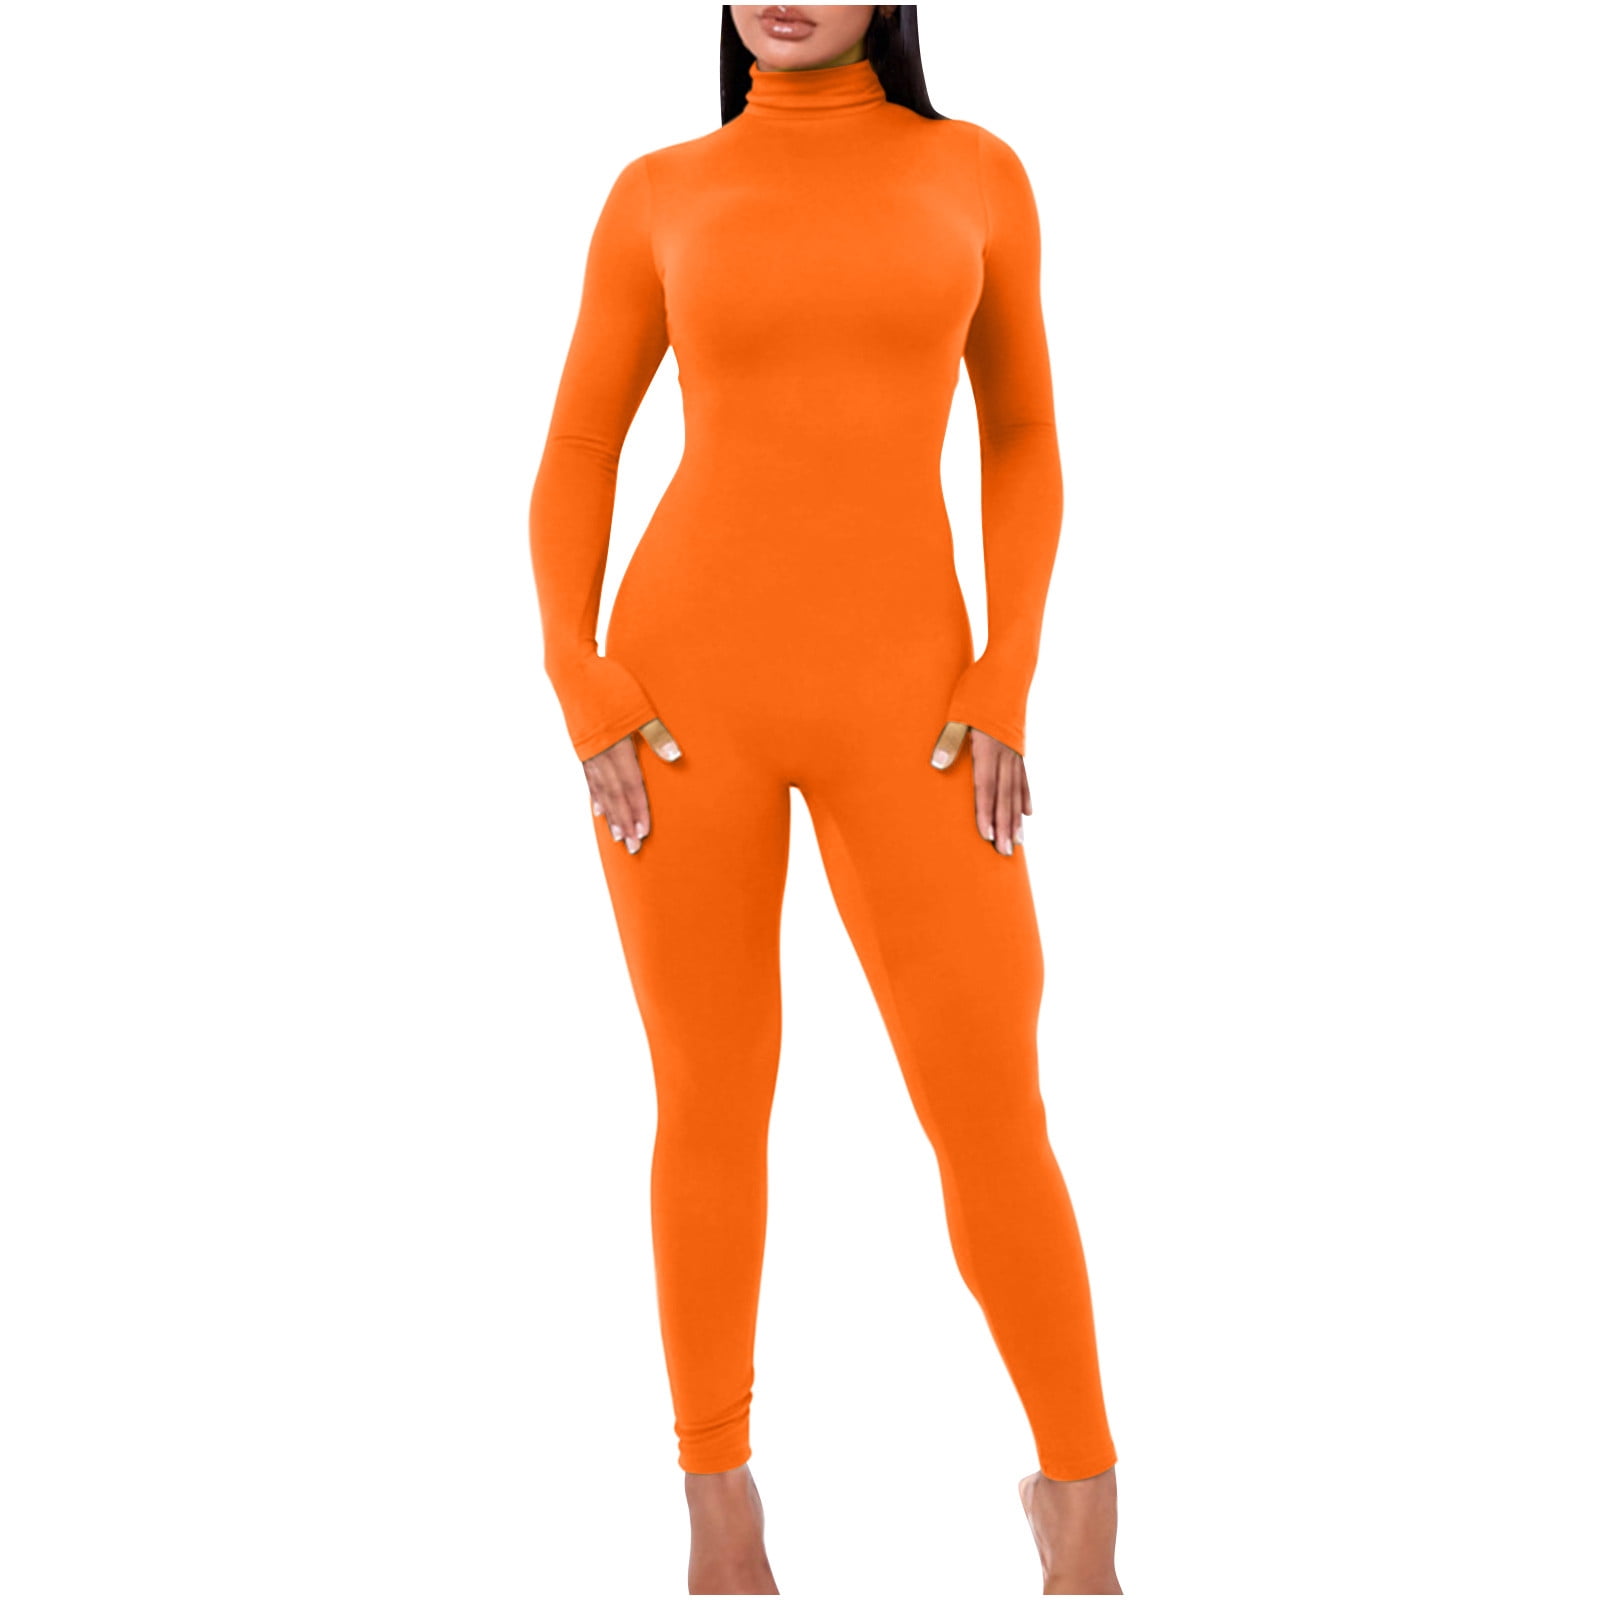 Women's Yoga Seamless One Piece Jumpsuits Workout Rompers Long Sleeve ...